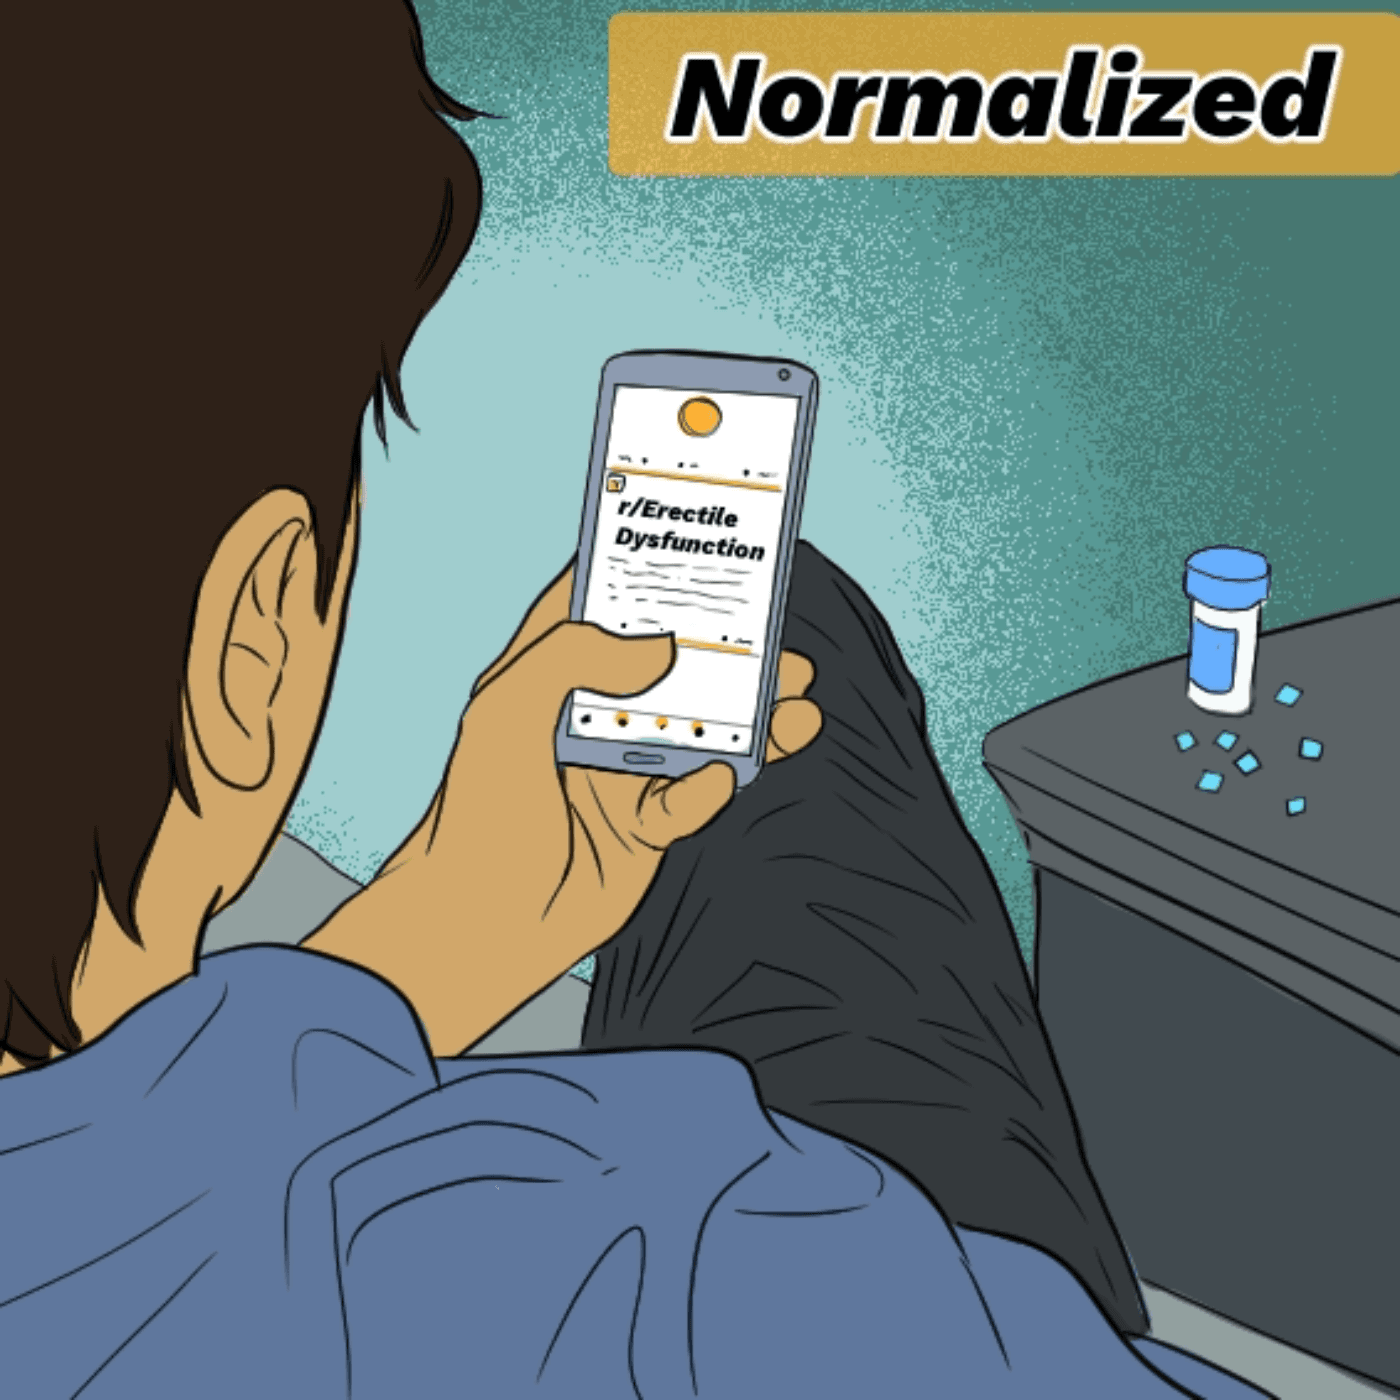 Thumbnail for "Normalized: Speaking Up About Erectile Dysfunction".